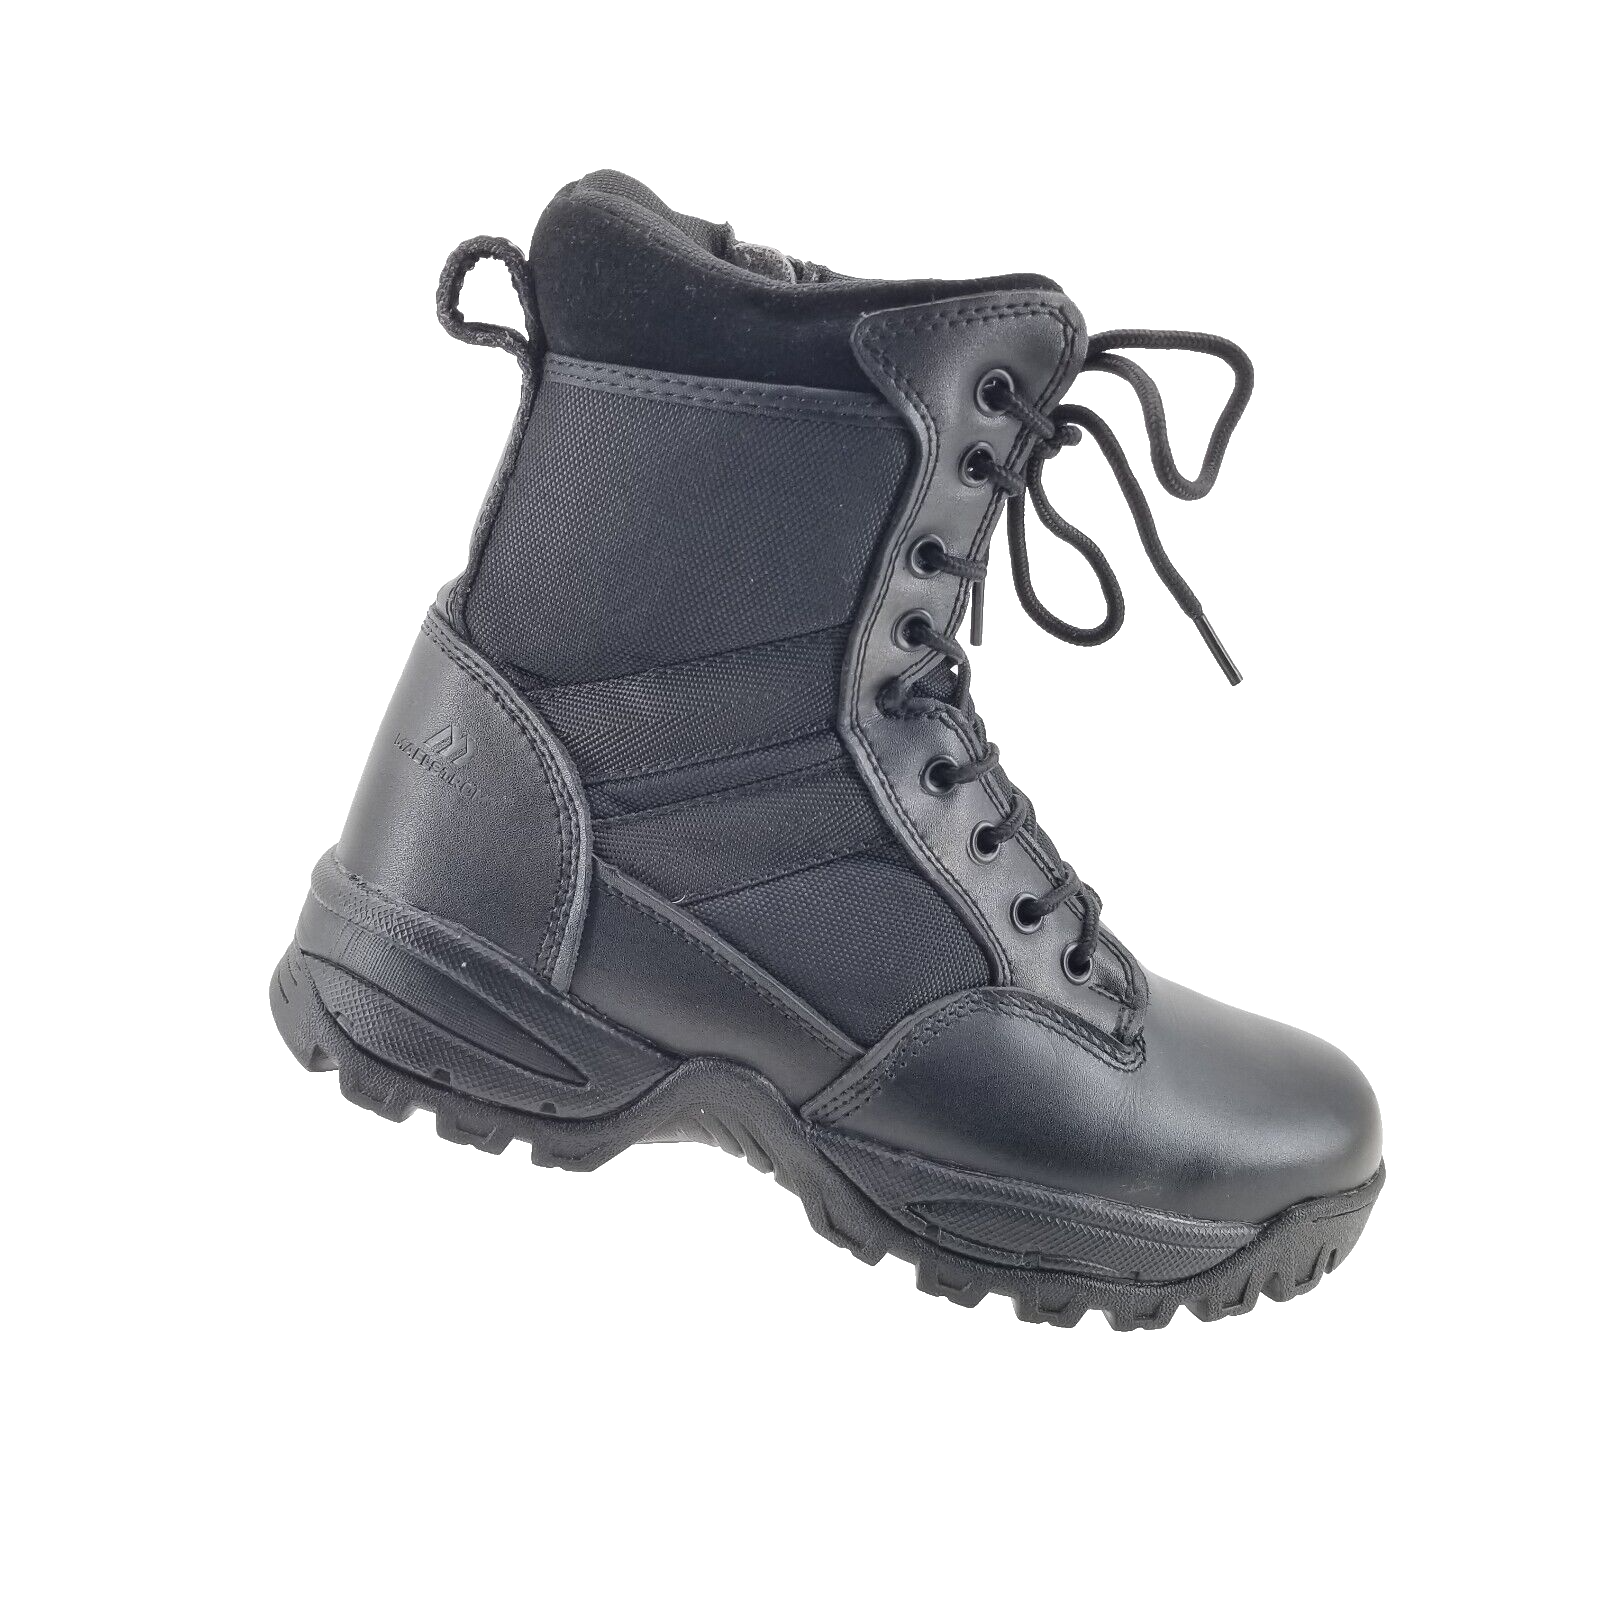 Primary image for Maelstrom Mens Tactical Foce  8"Boot, Black, Lace & Zipper Closure 9.5 Wide